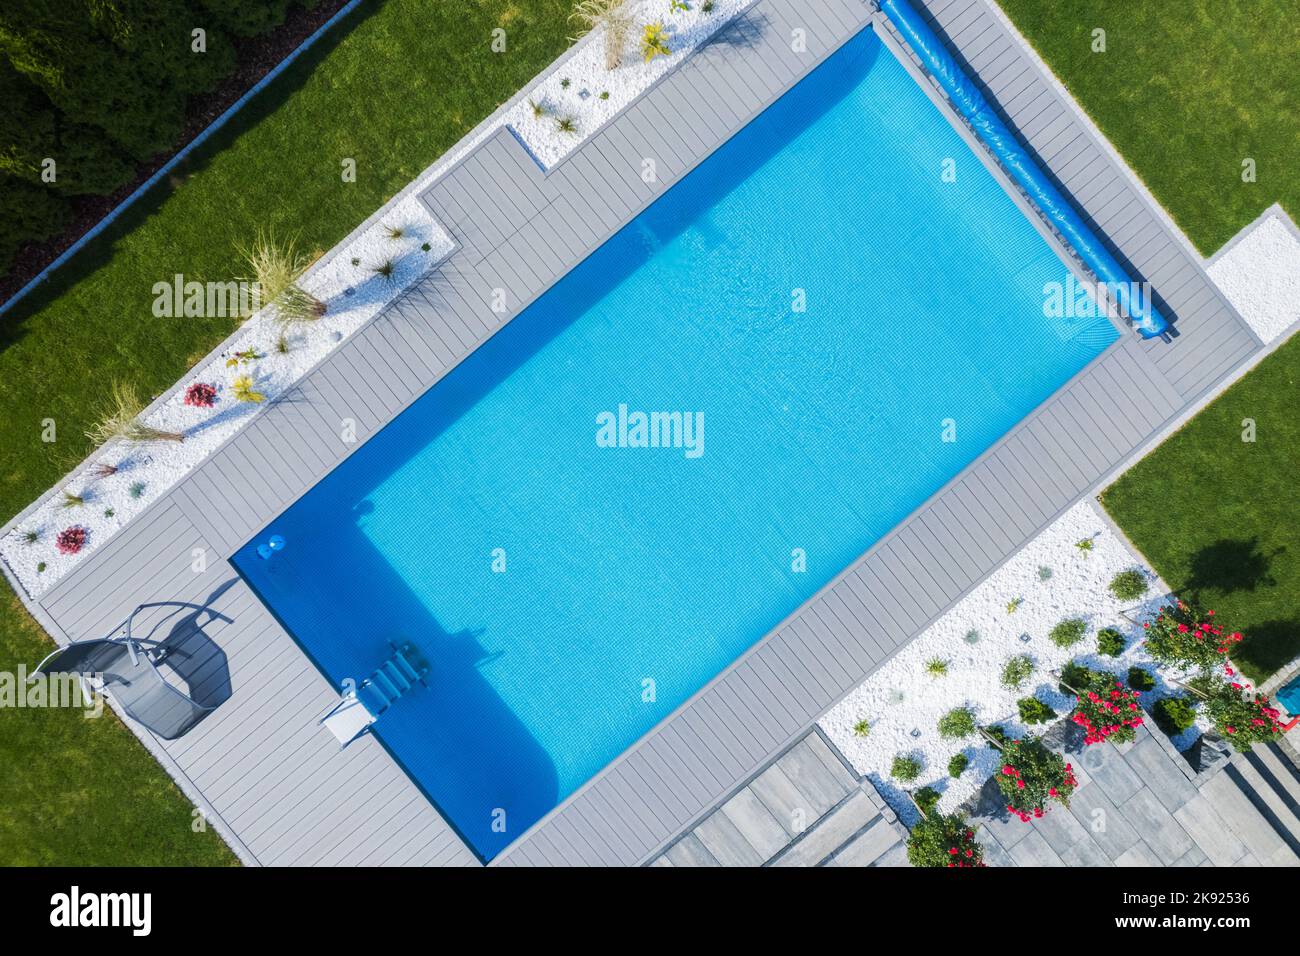 Perfectly Maintained Outdoor Swimming Pool Surrounded by Green Lawn and Landscaped Flower Beds. Residential House Backyard Garden Design. Recreational Stock Photo